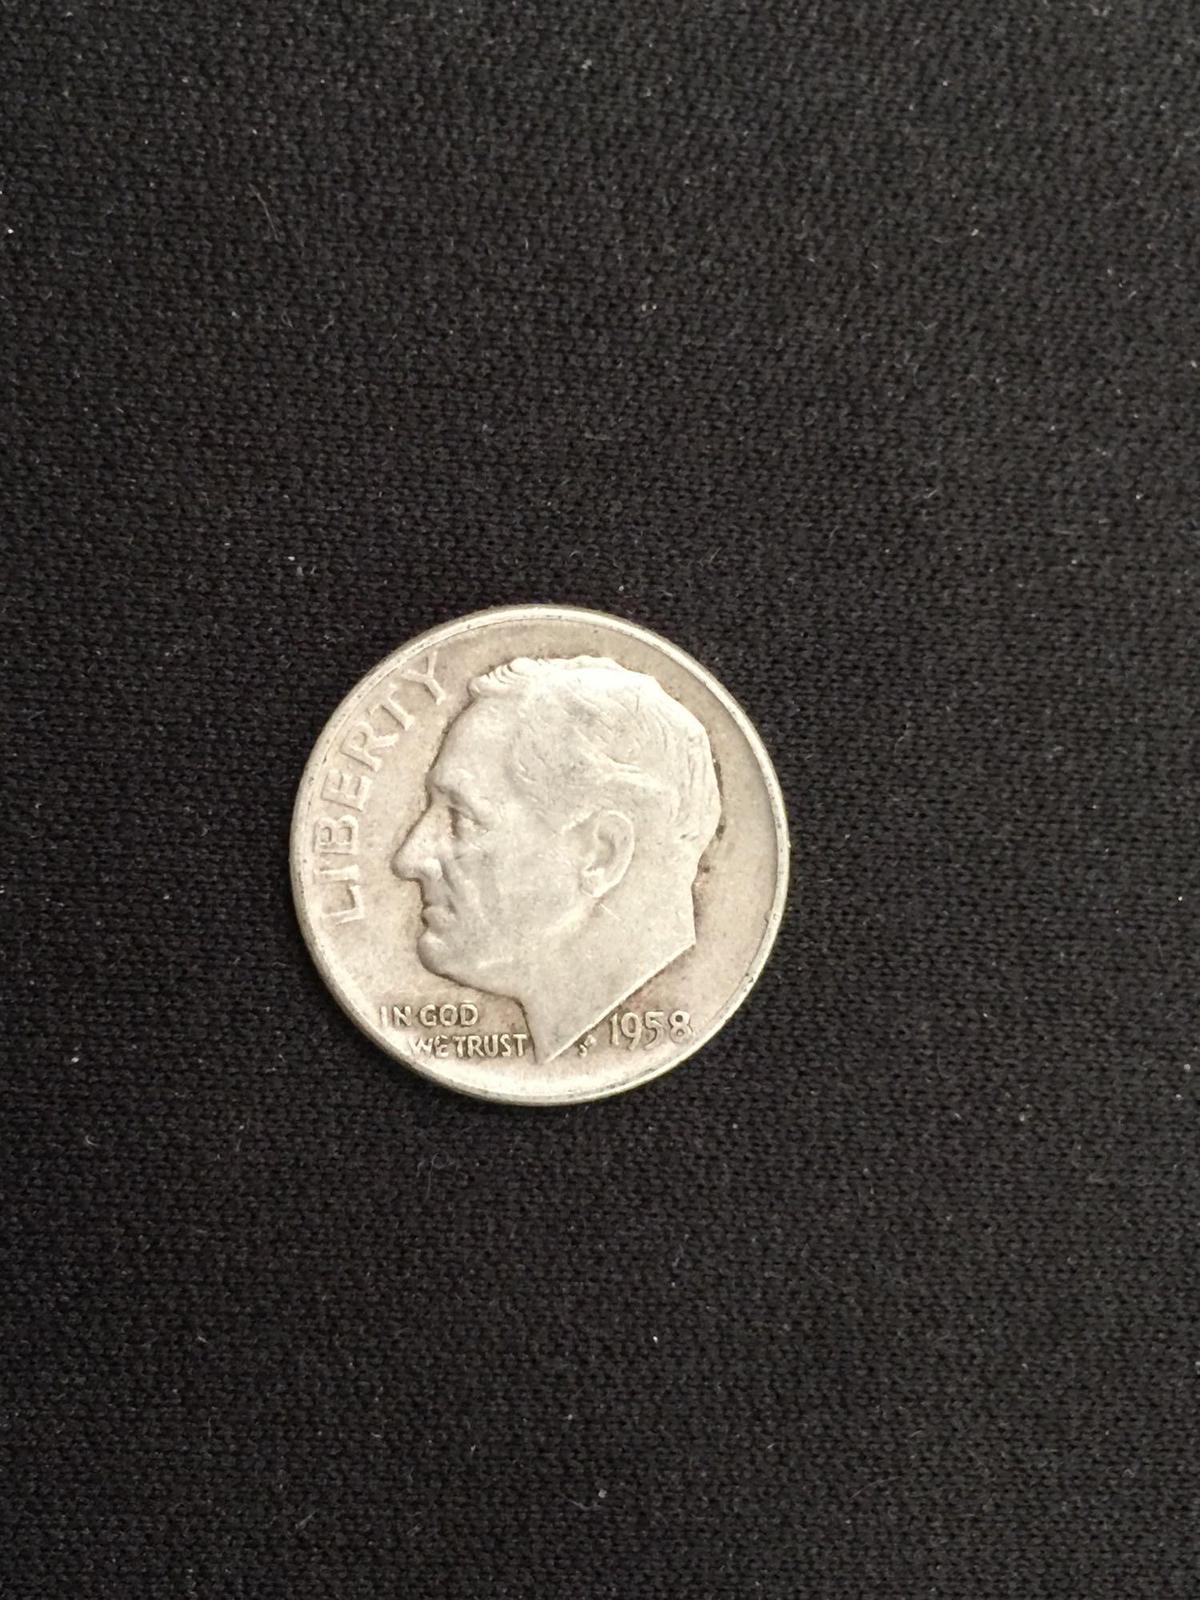 1958-D United States Roosevelt Dime - 90% Silver Coin